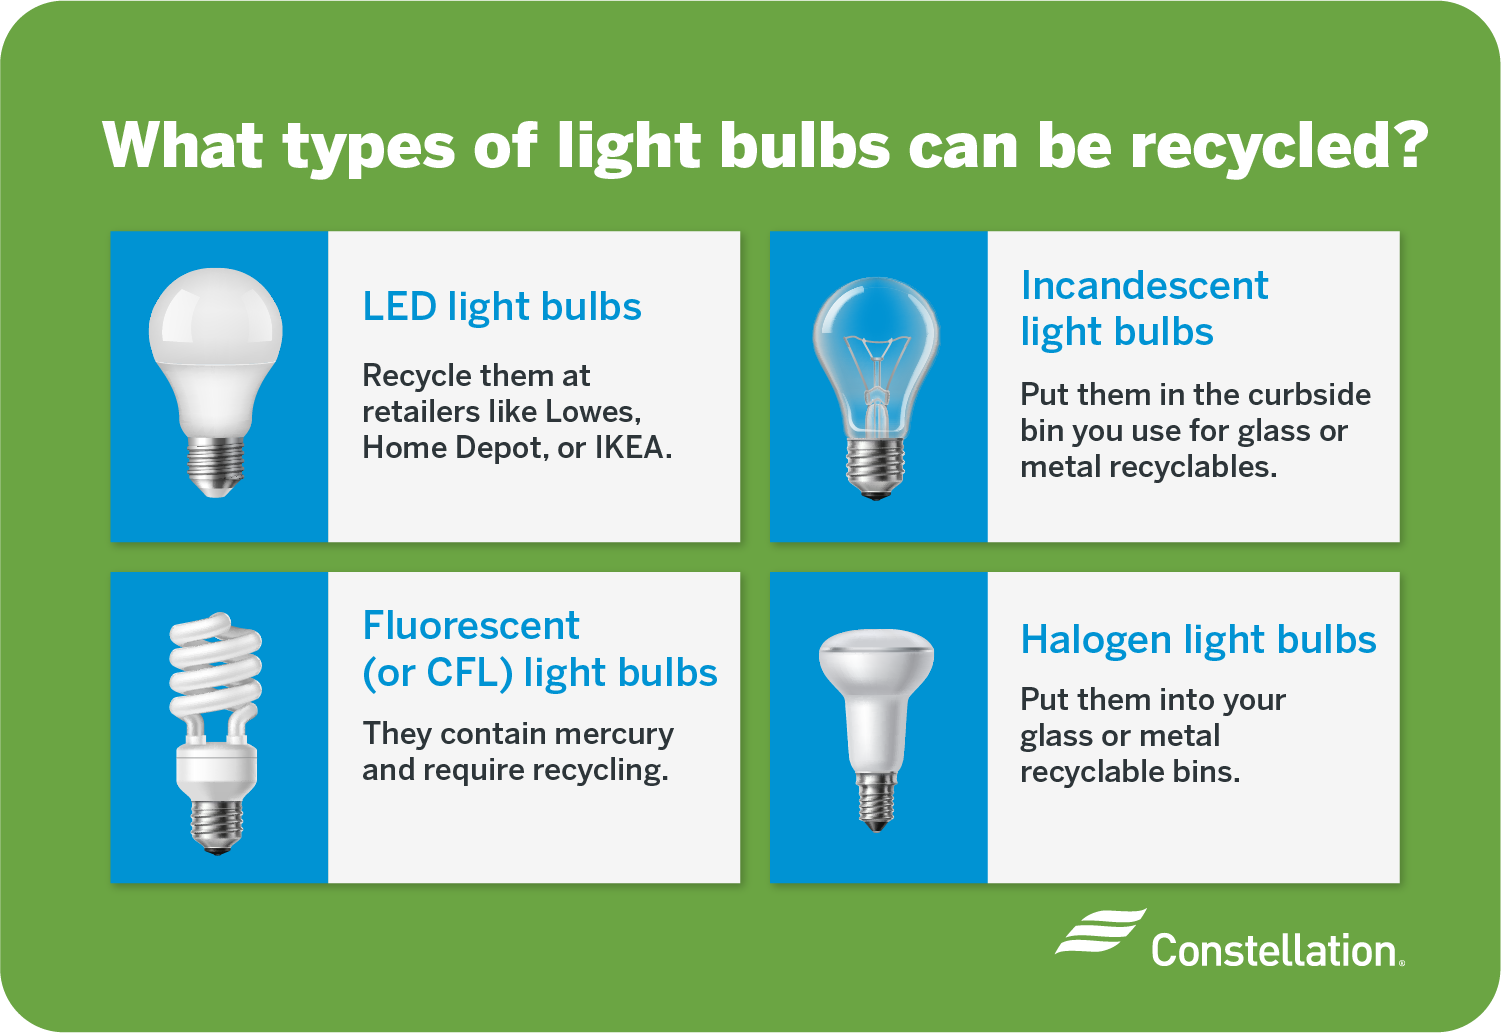 What types of light bulbs can be recycled